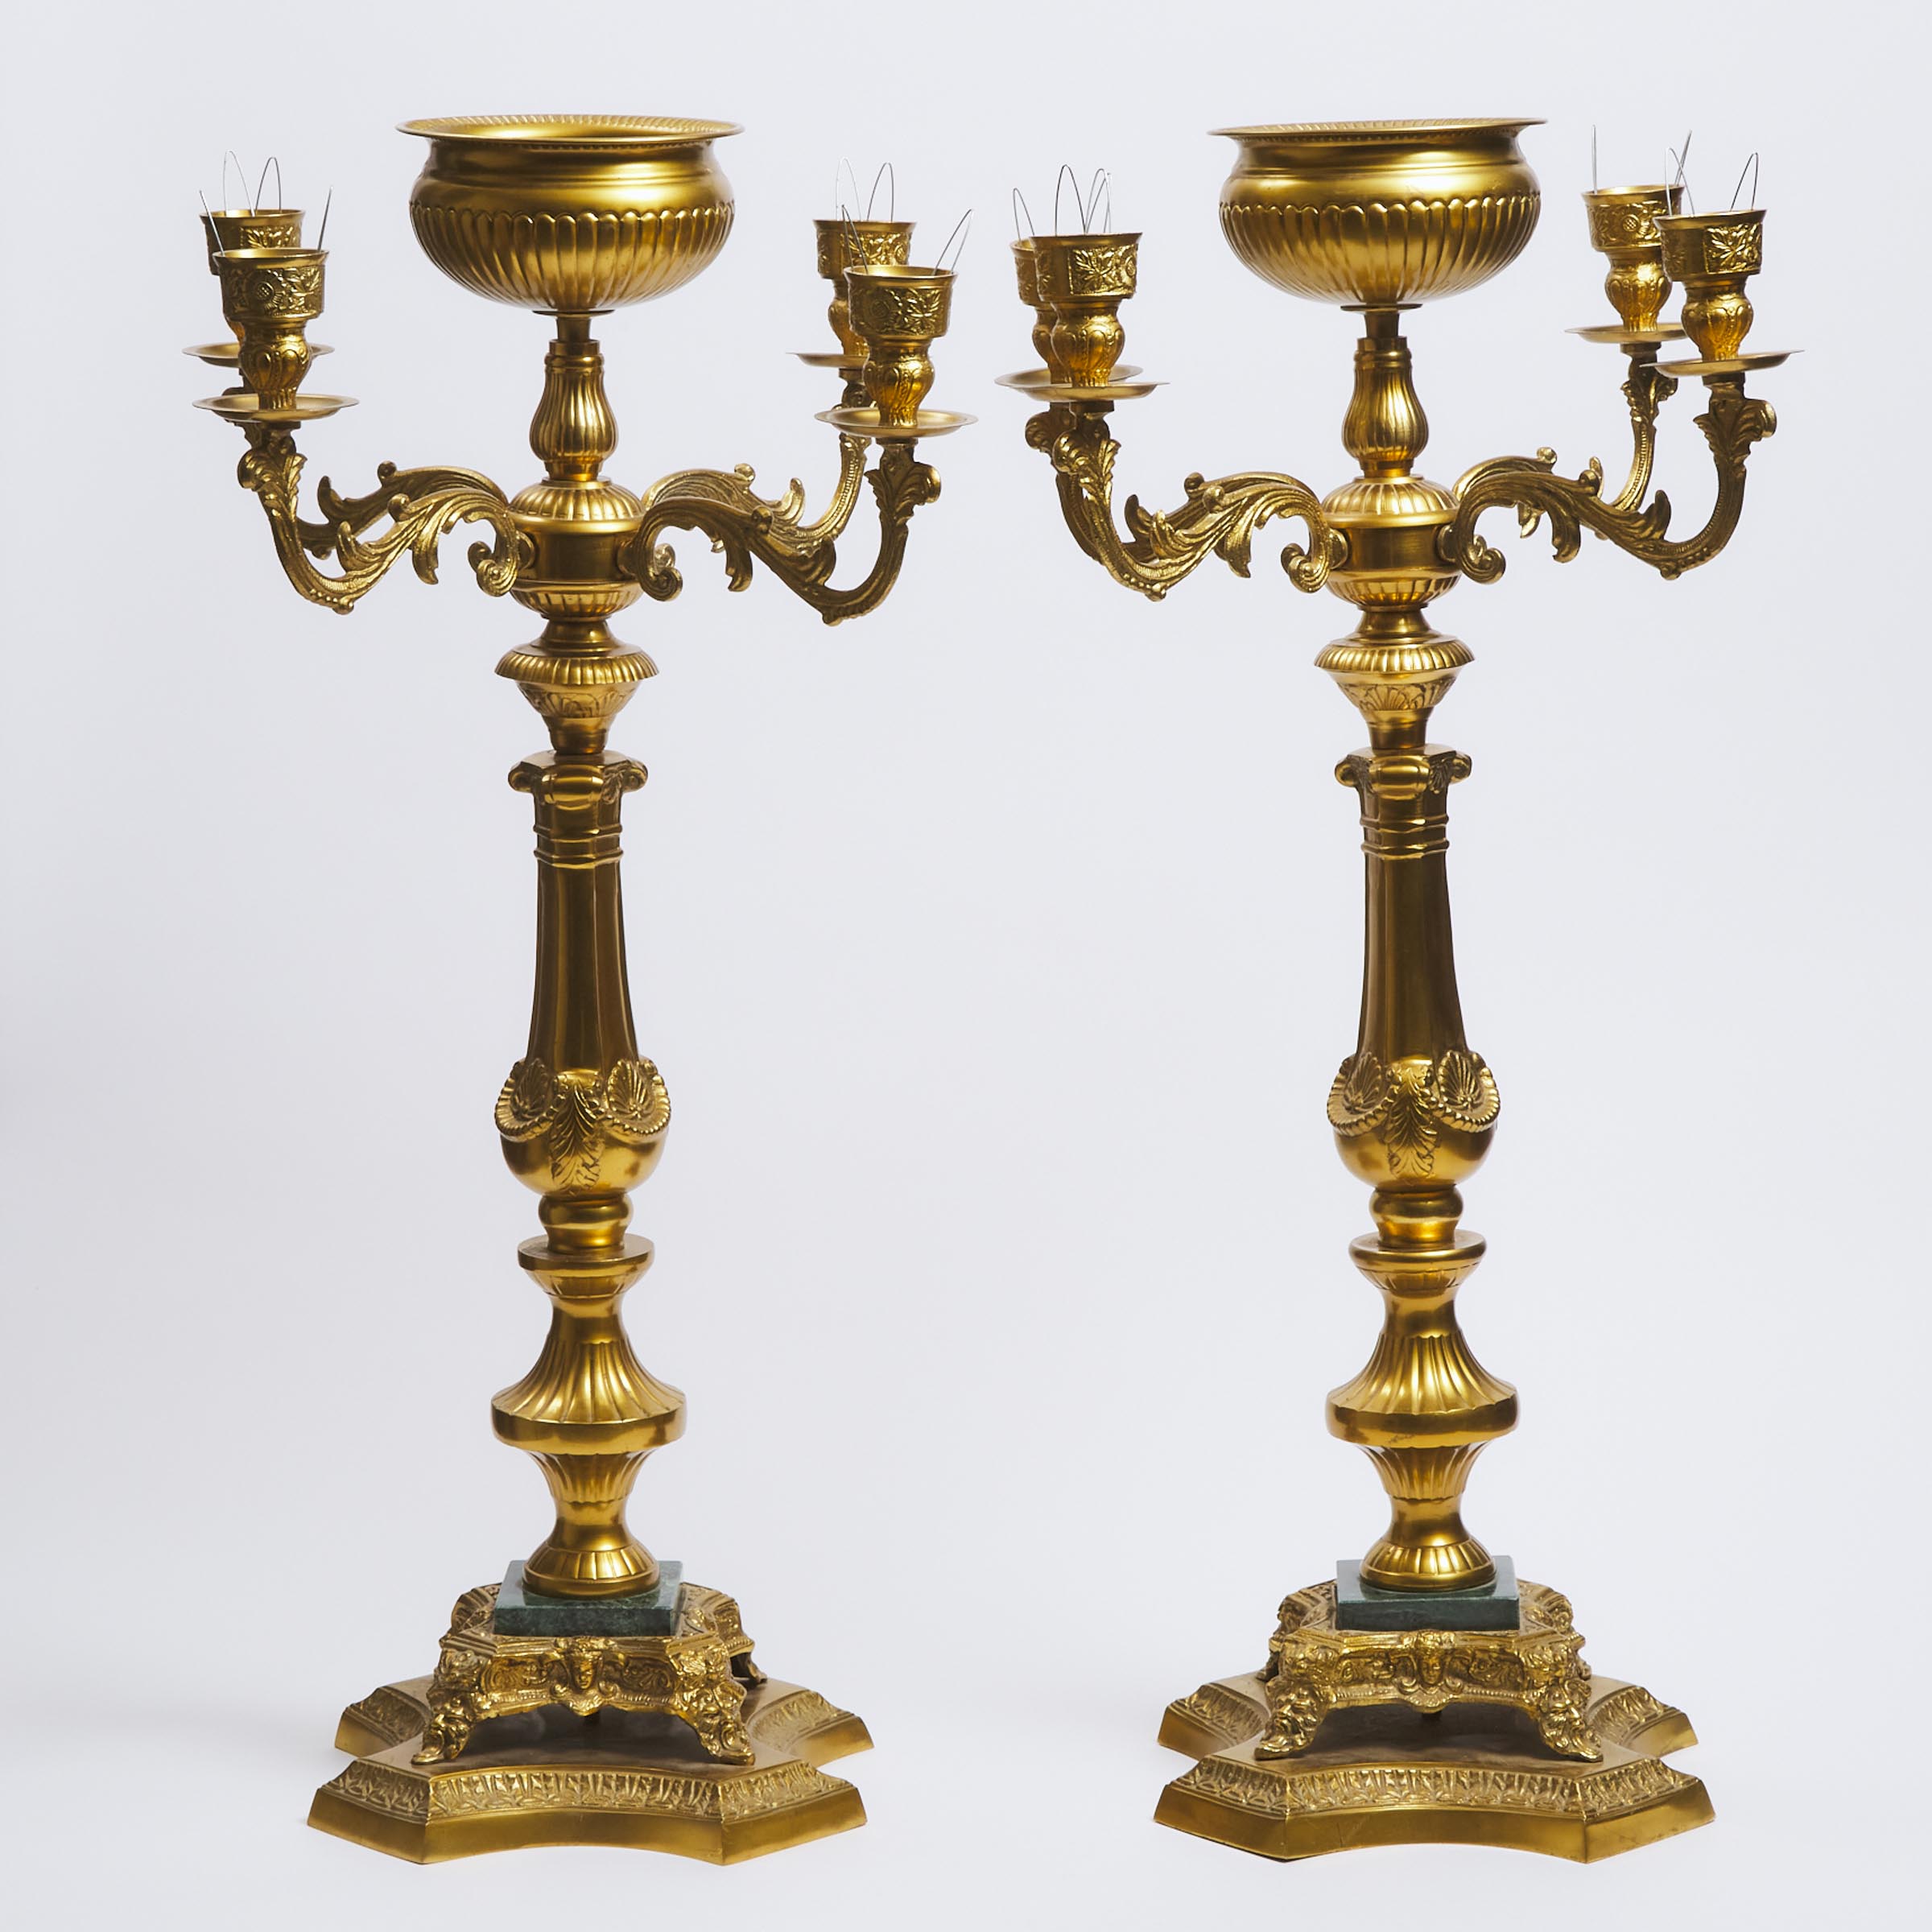 Large Pair of Marble Mounted Gilt Brass Banquet Candelabras, 20th century